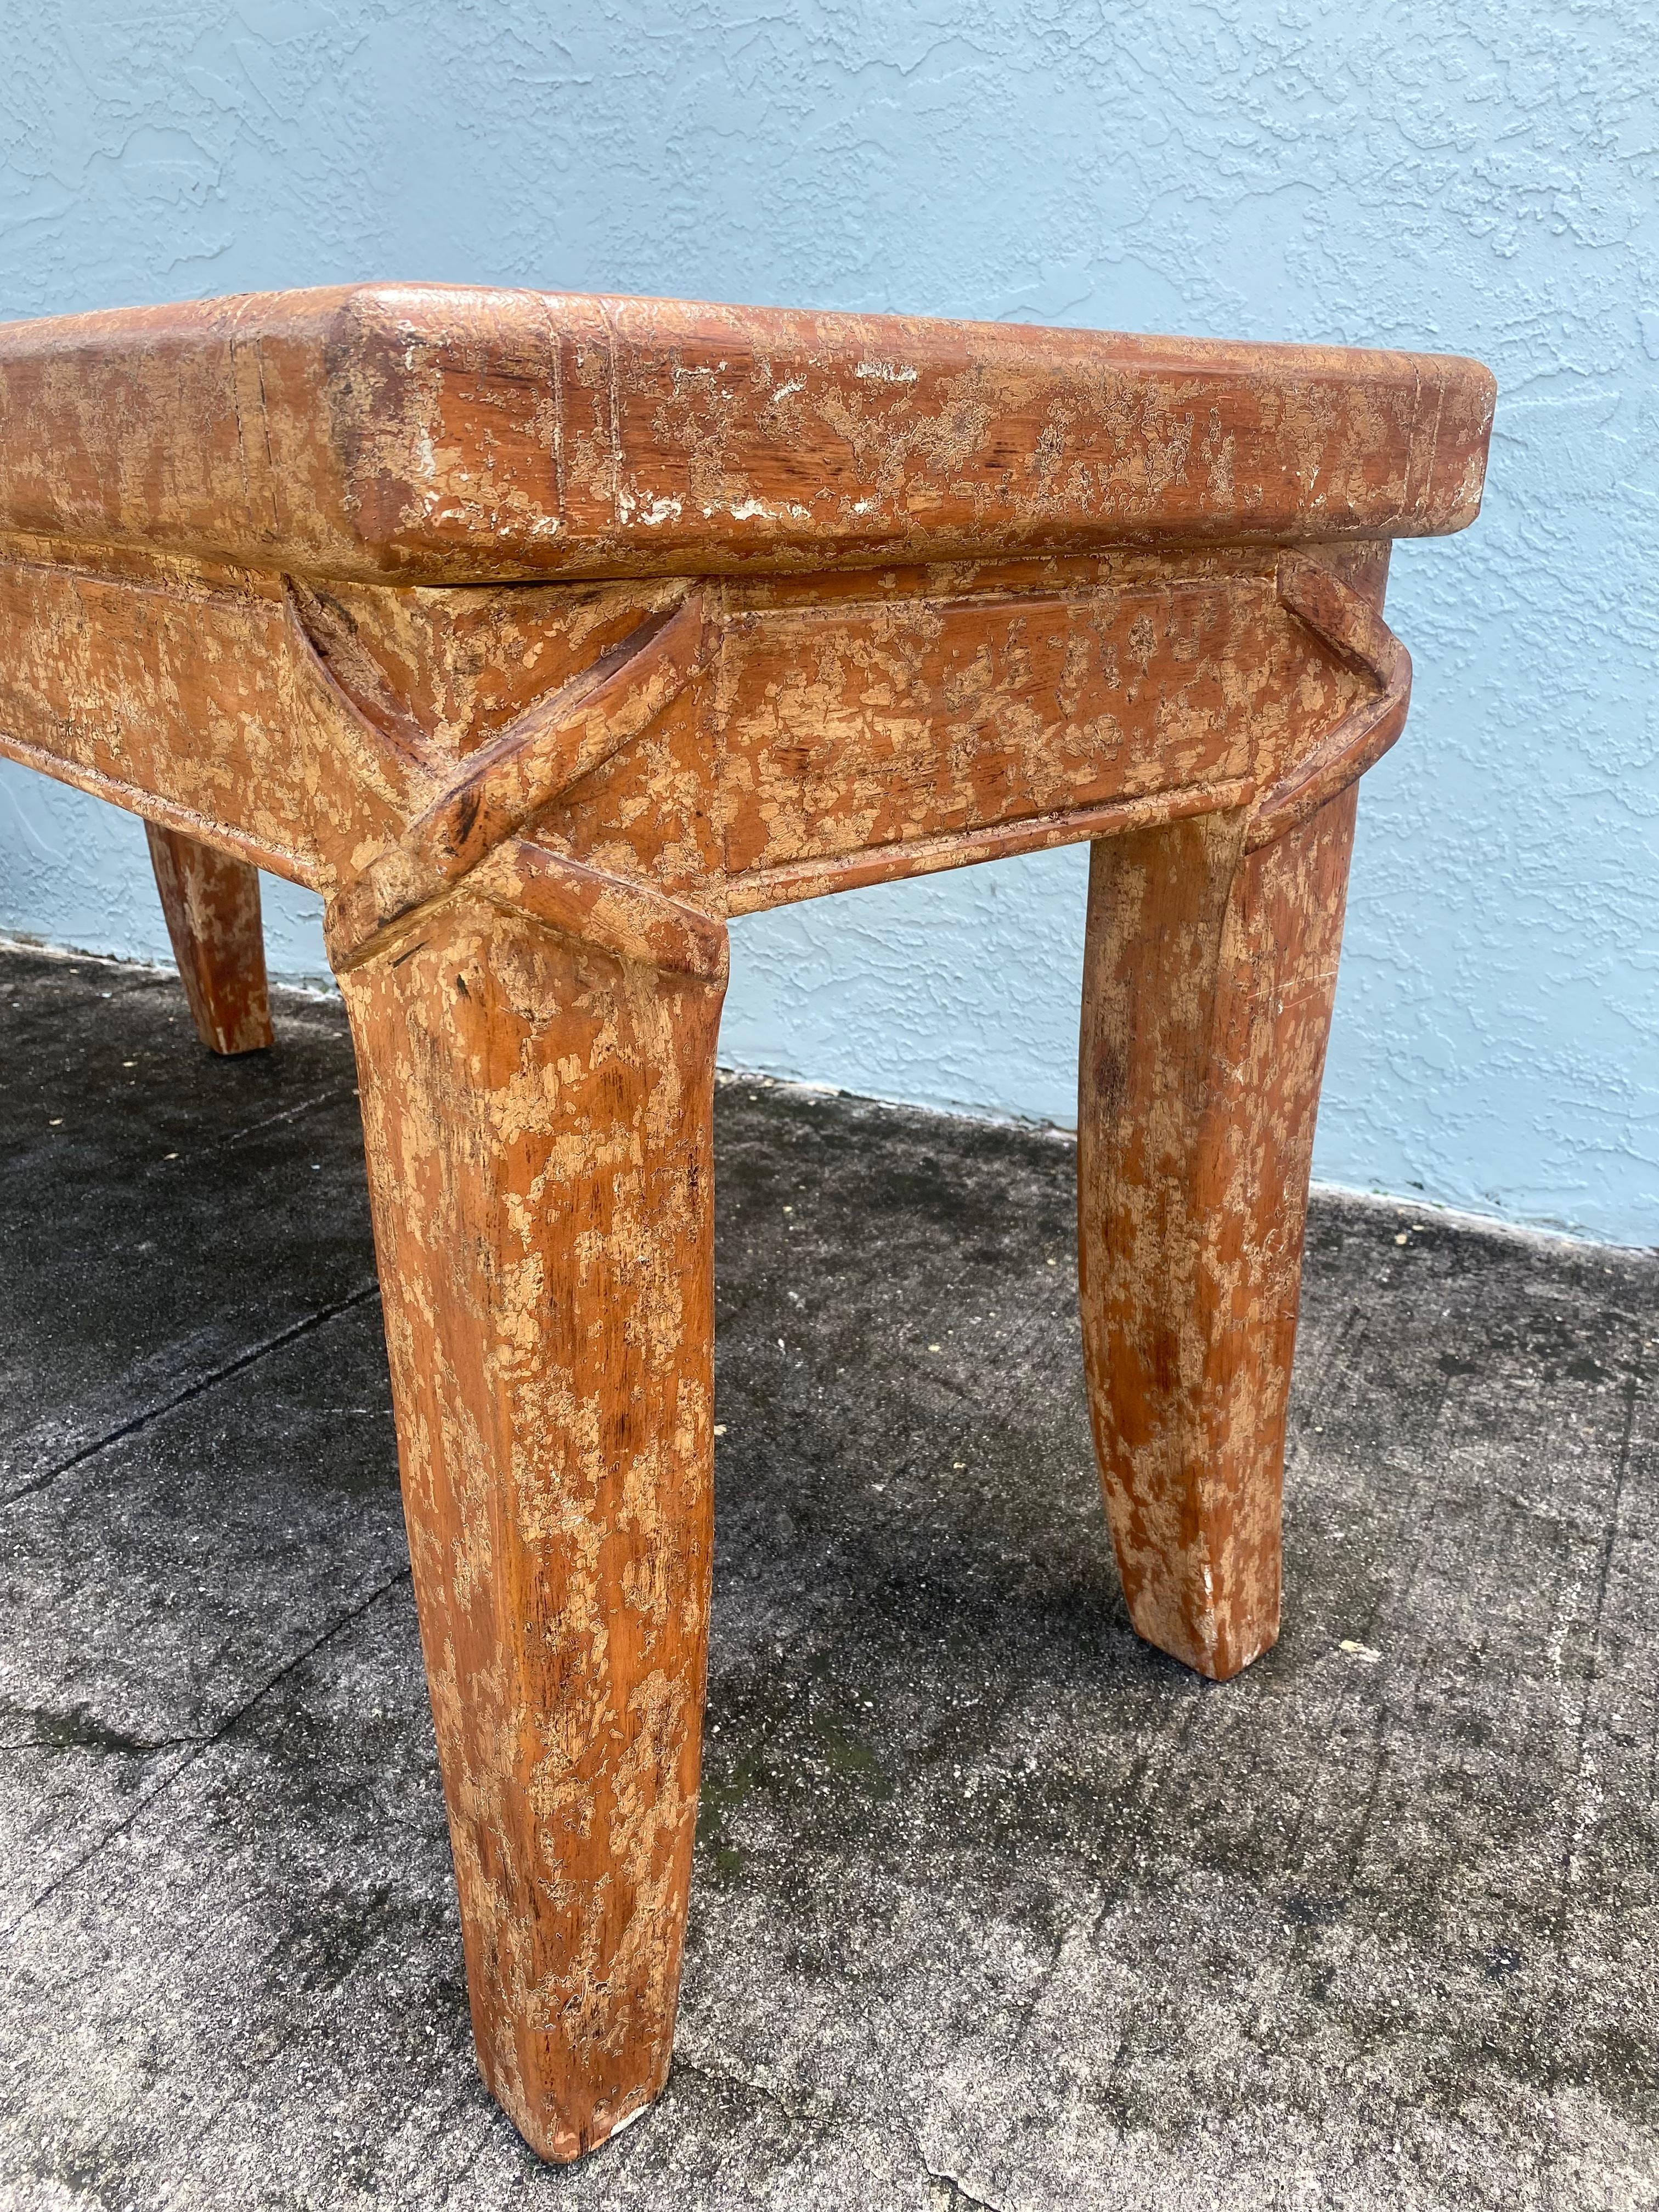 1940s Artistic Salmon Carved Textured Rustic Farmhouse Wood Console Table Desk For Sale 2